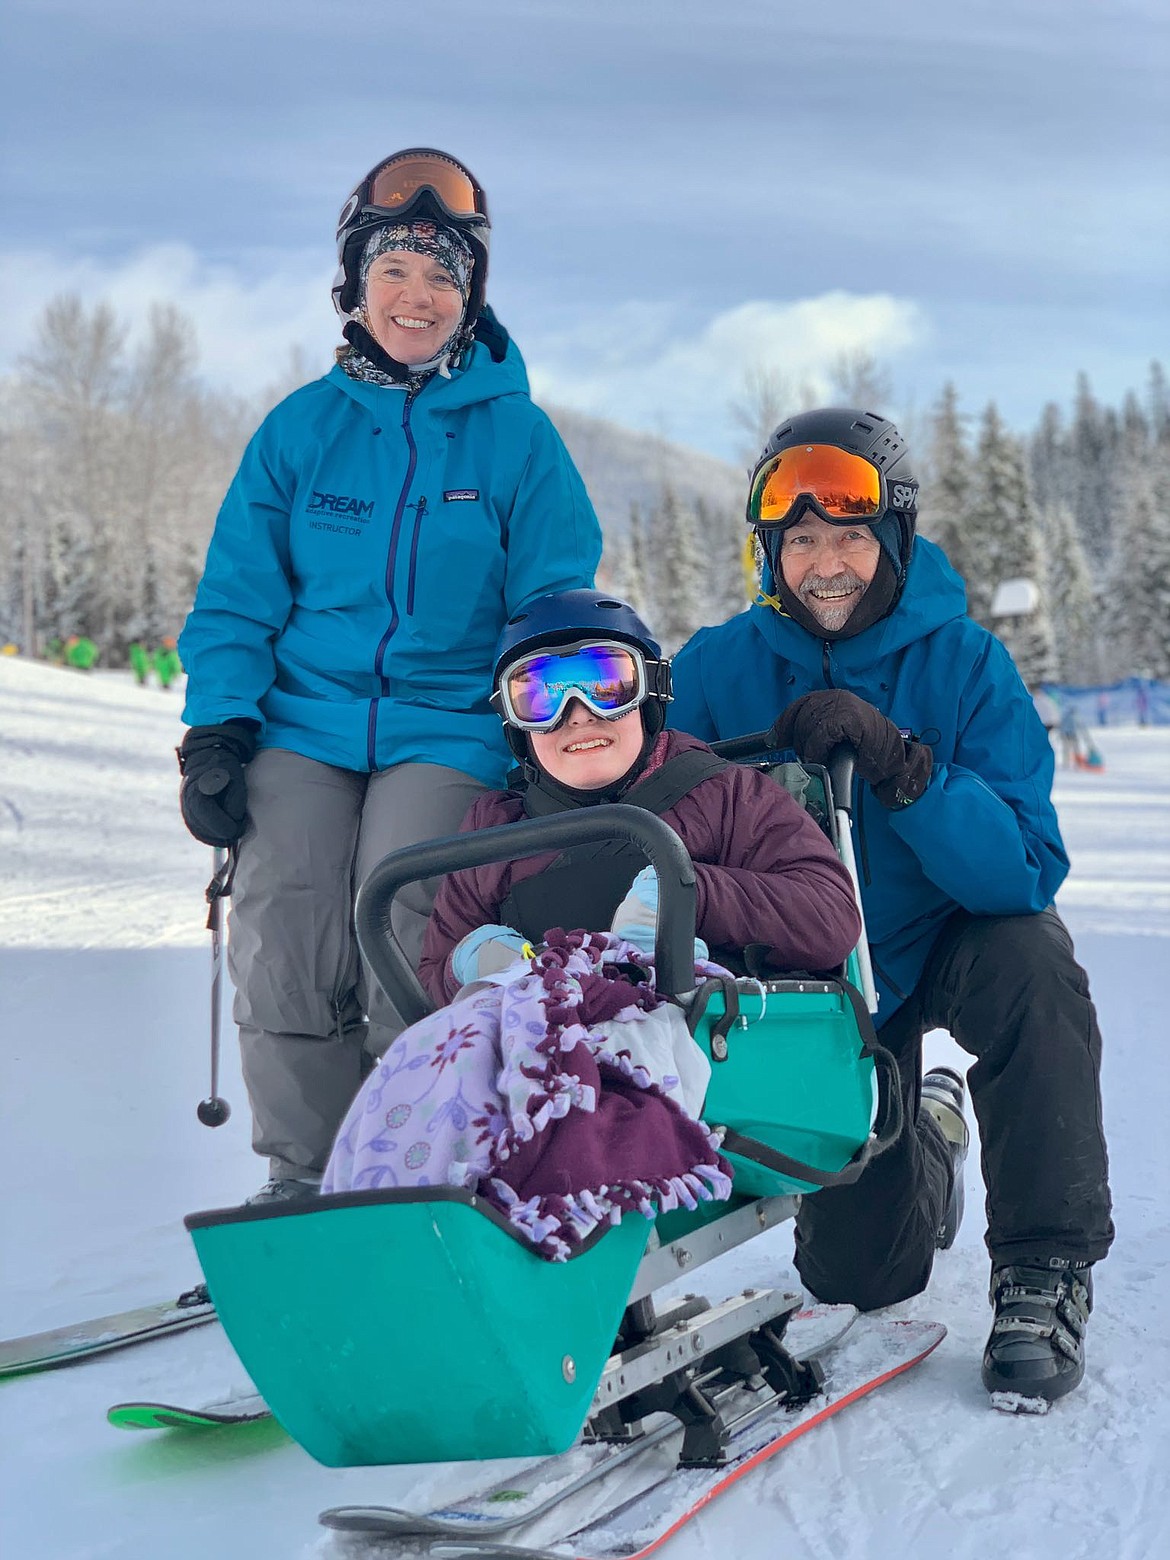 Volunteers Jenny Griswold and Jack Klovstad pose for a photo with a Glacier High School student at Whitefish Mountain Resort. Over 100 volunteers help run DREAM Adaptive’s programs, including the winter sit-ski lessons and group activities. (Photo provided by DREAM Adaptive Recreation)